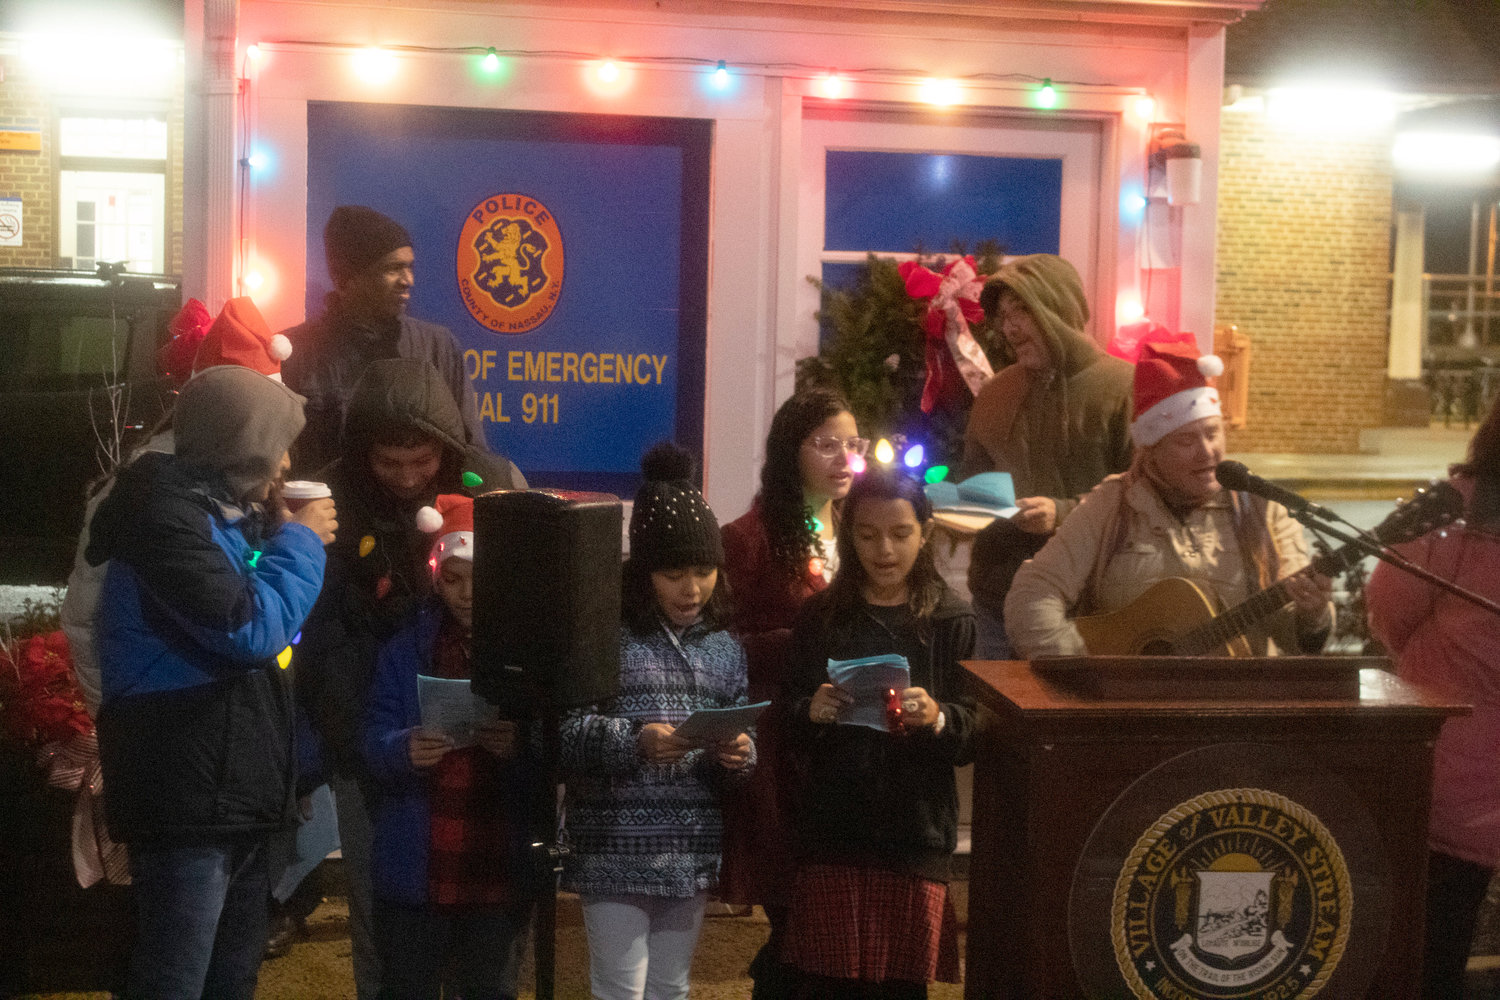 It was a merry, intimate gathering of village residents, dignitaries, and members from the Valley Stream Chamber of Commerce at the “Lighting of Gibson” last Sunday night.